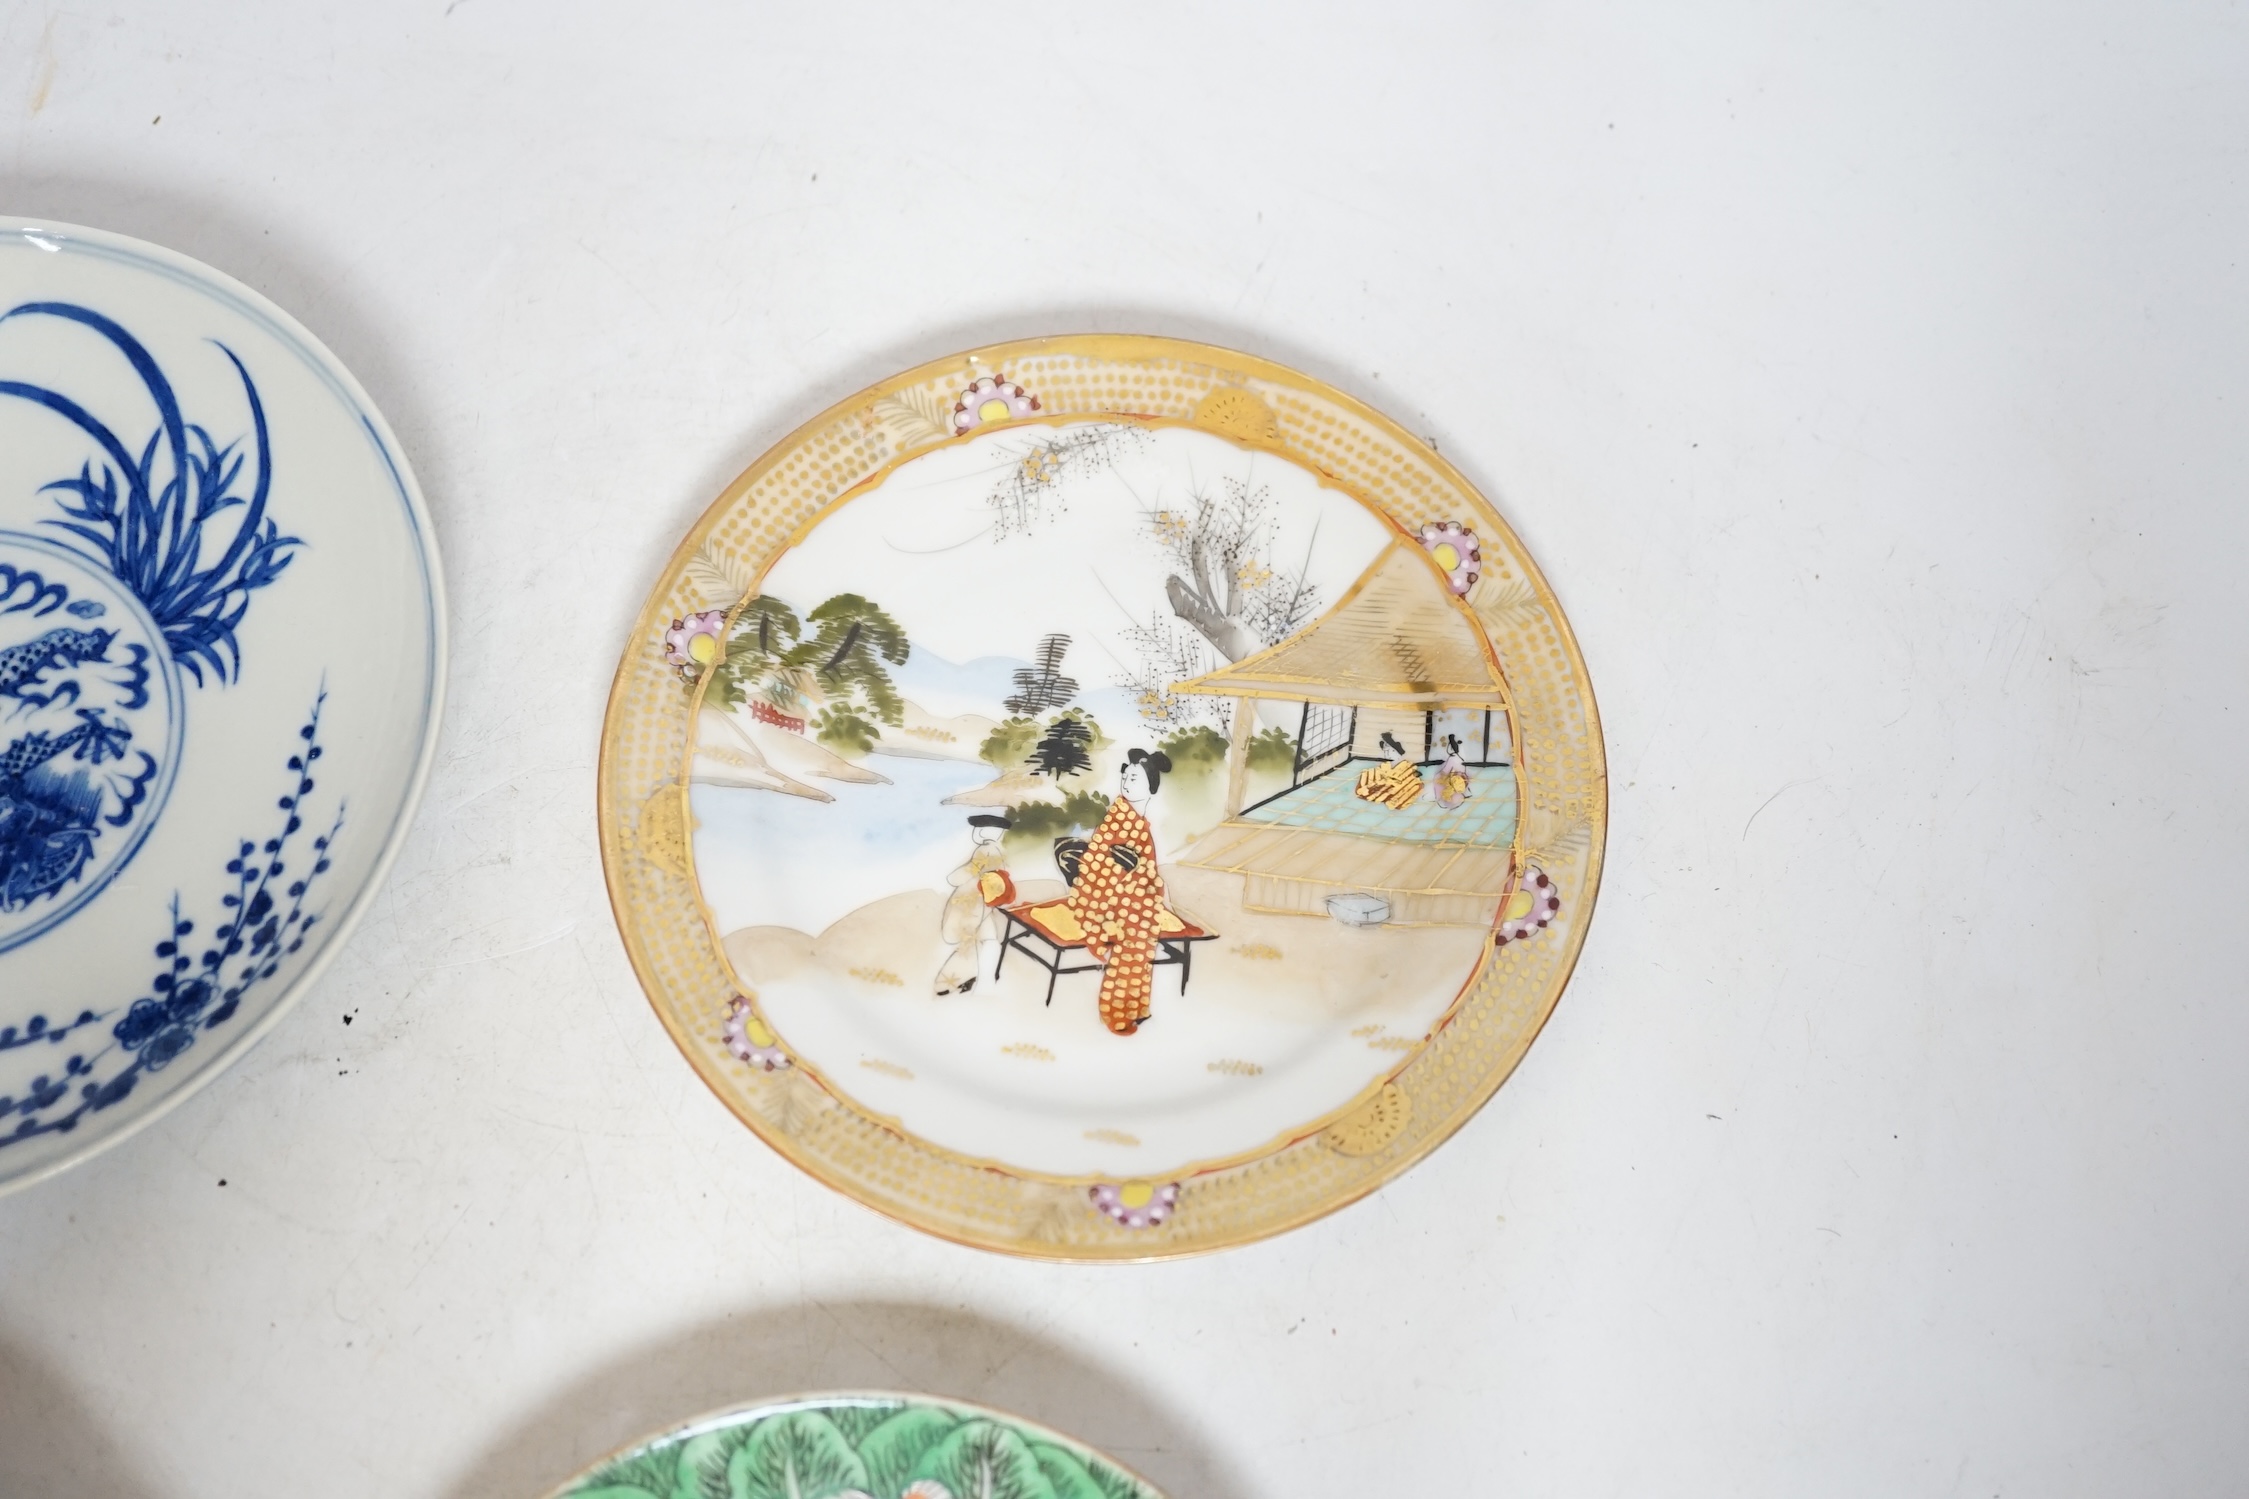 Four Chinese or Japanese porcelain saucers, largest 16.5 cm diameter - Image 3 of 9